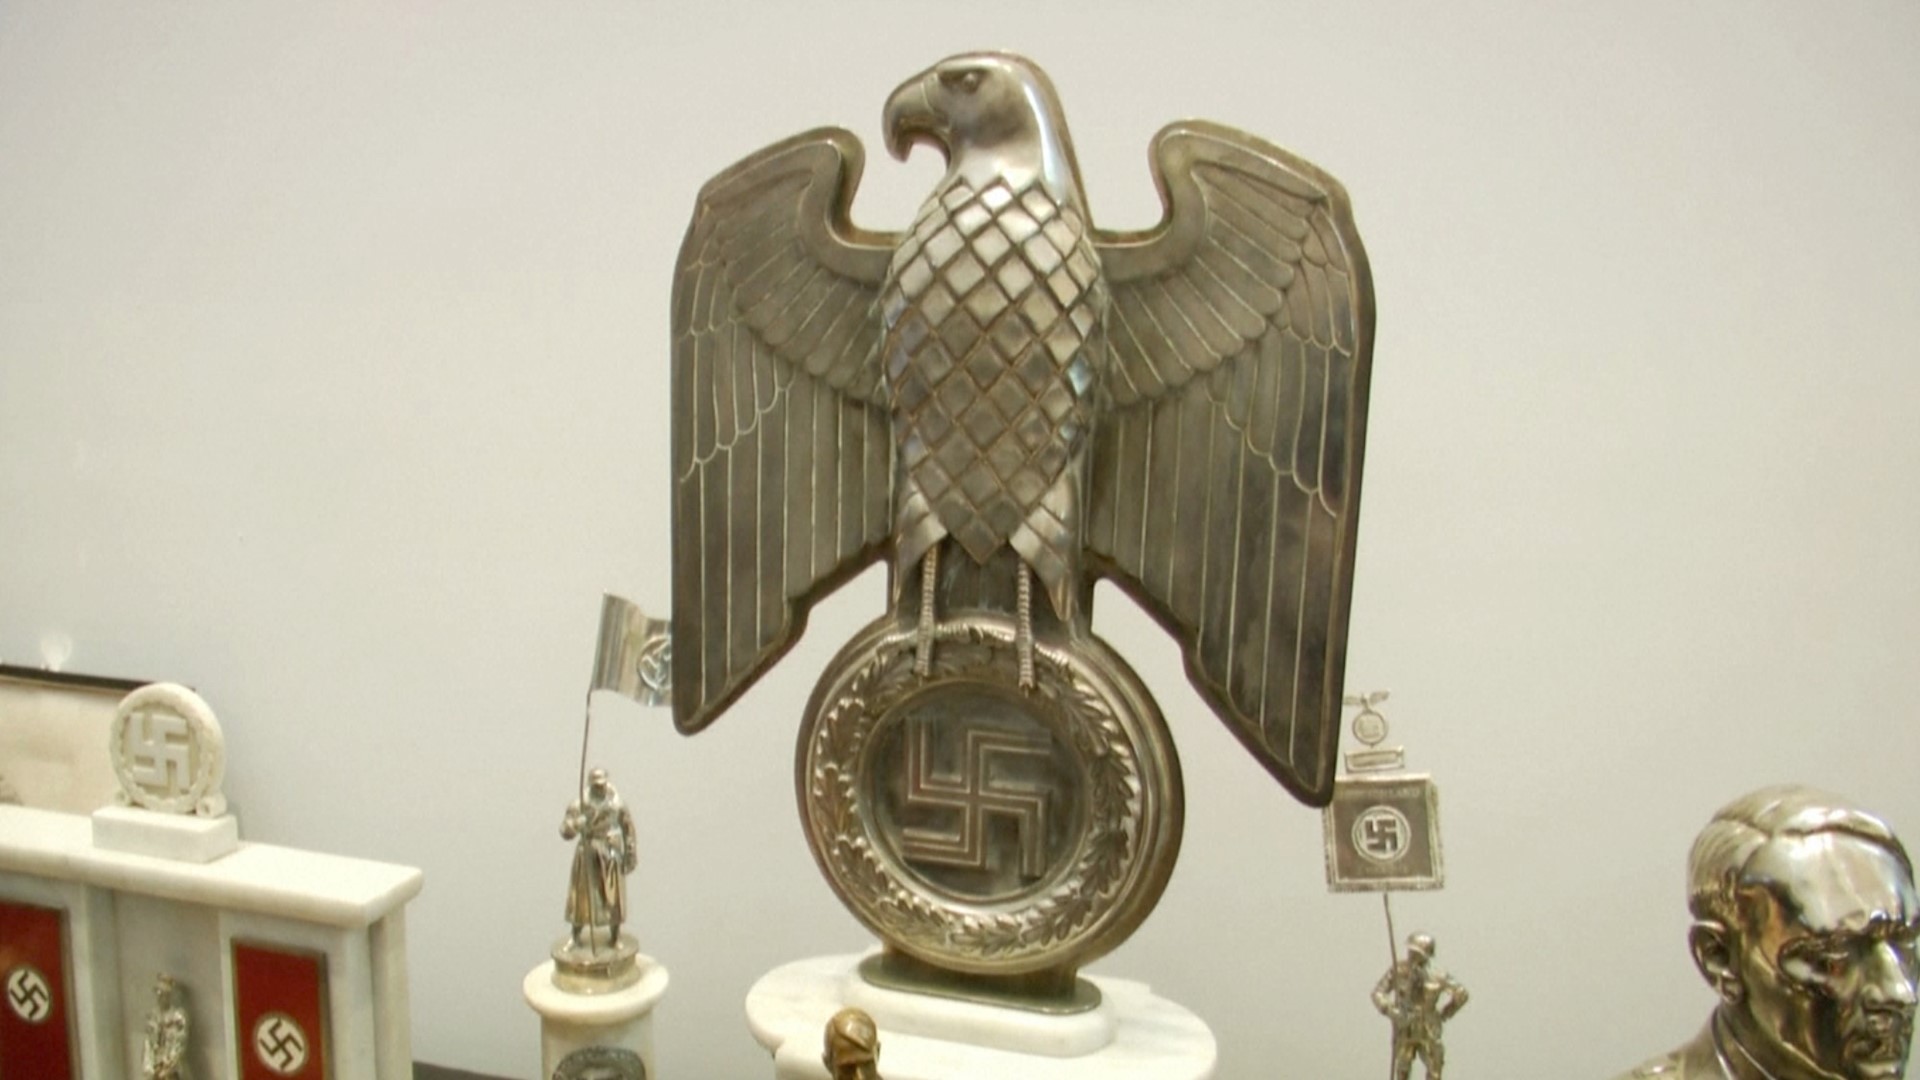 The Buenos Aires' Holocaust Museum recently put on display several items of Nazi artefacts including 
a bust of Adolf Hitler, a statue of the Imperial Eagle perched on top of a swastika, and board games that were used to indoctrinate children.